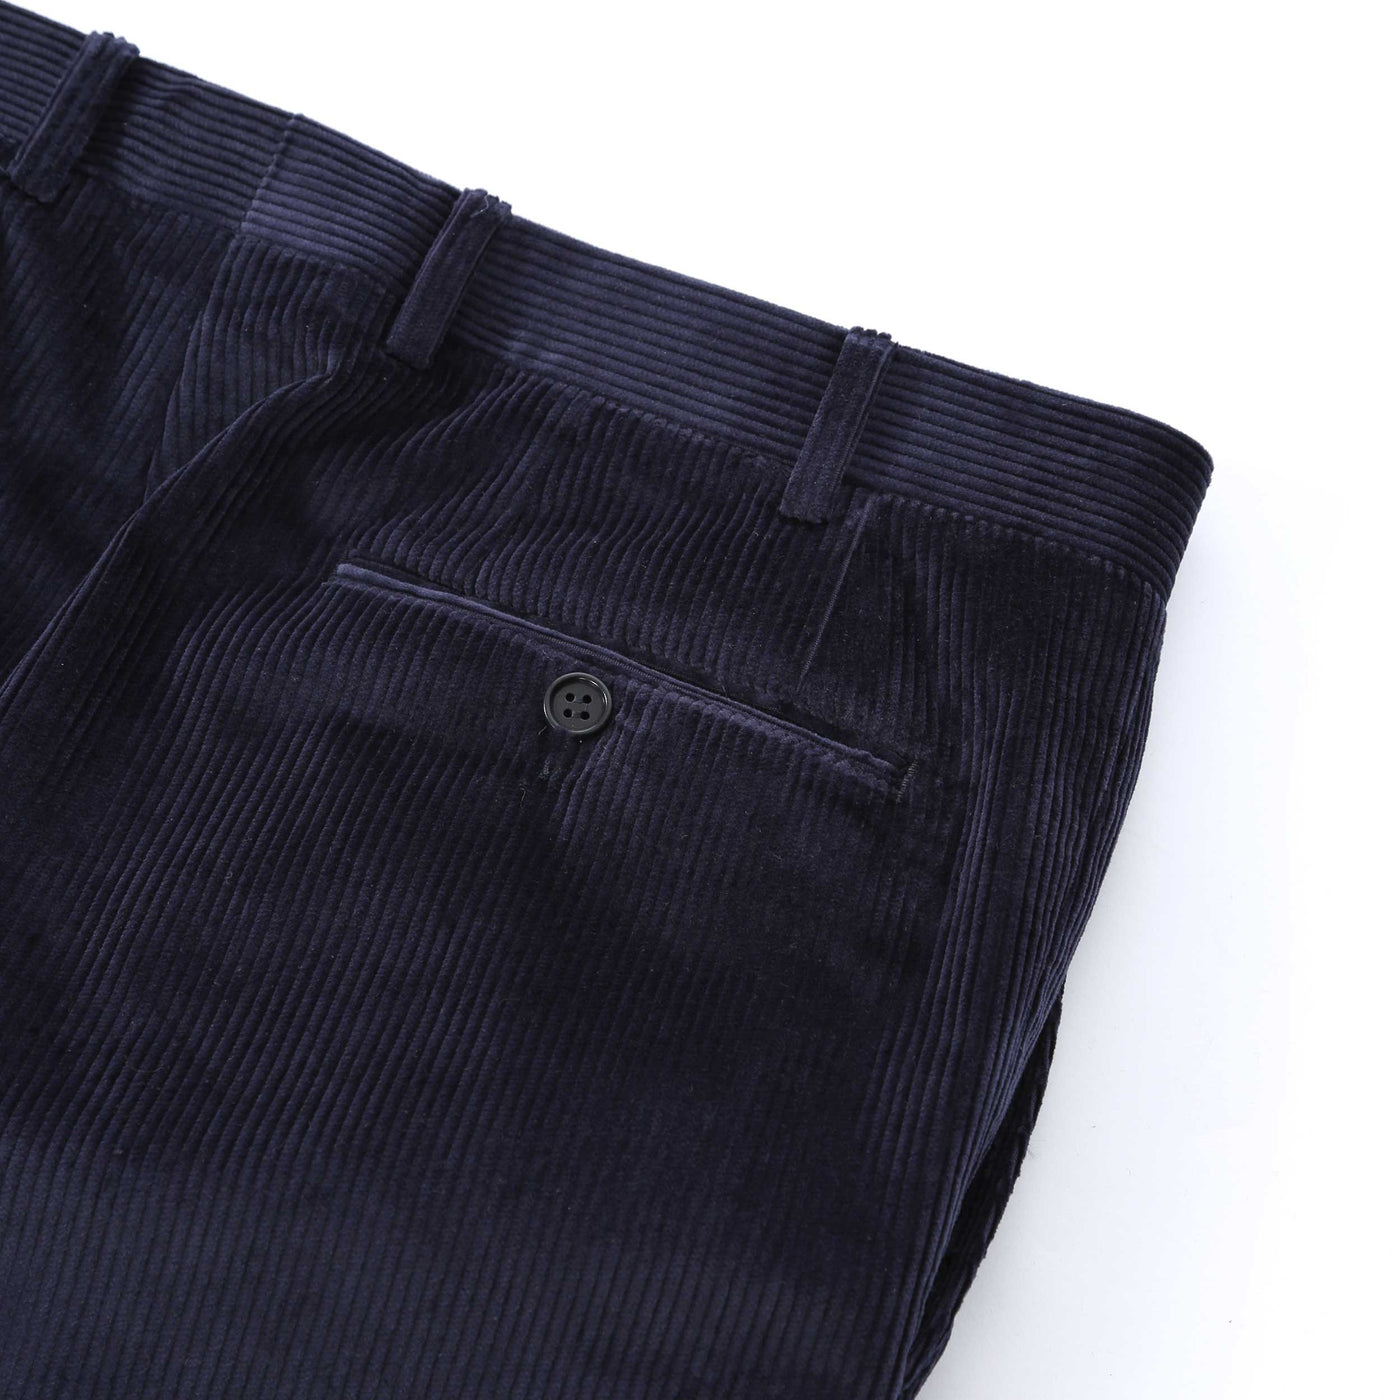 Canali Cord Trouser in Navy Pocket Detail